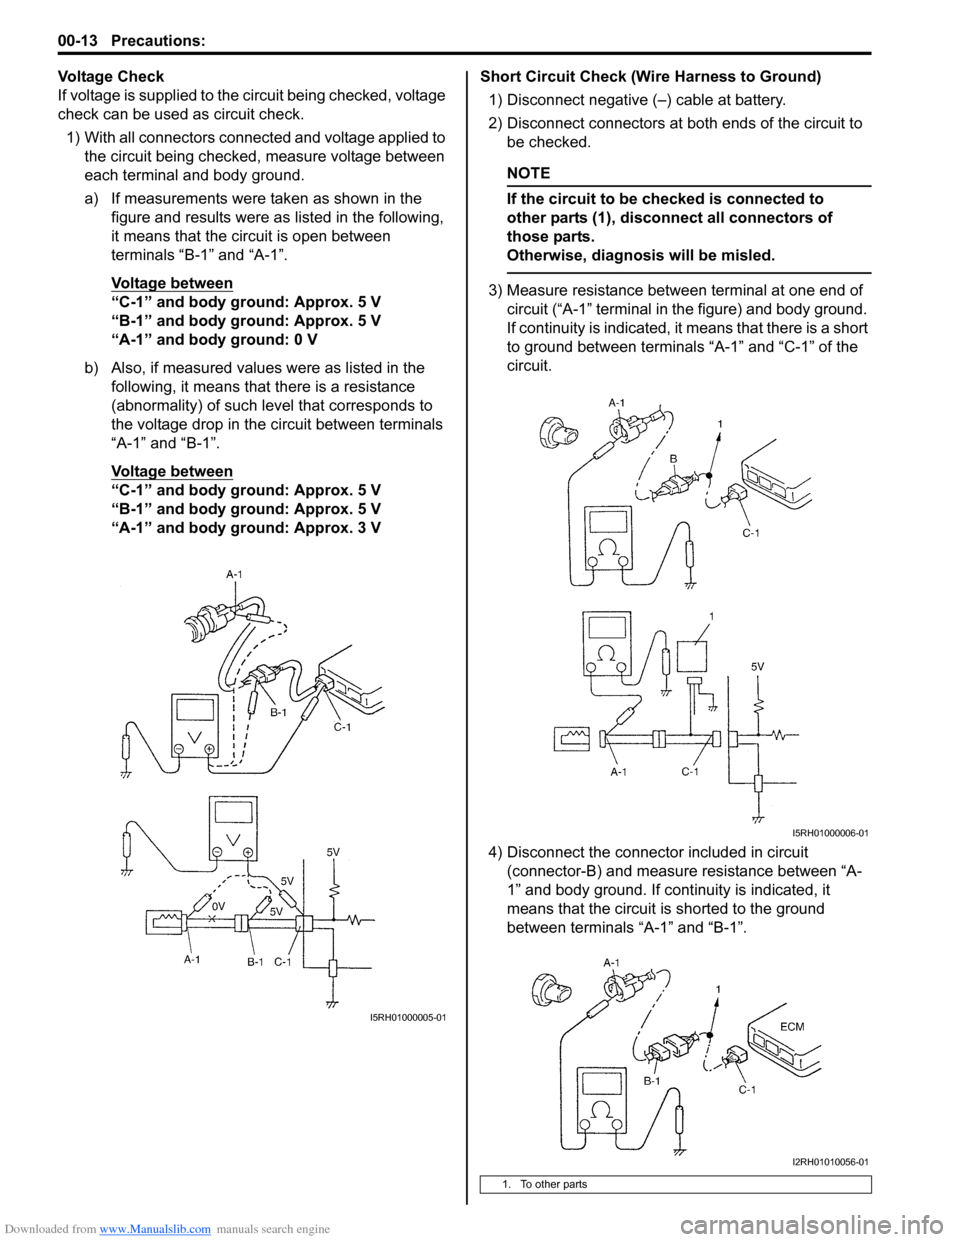 SUZUKI SX4 2006 1.G Service User Guide Downloaded from www.Manualslib.com manuals search engine 00-13 Precautions: 
Voltage Check
If voltage is supplied to the circuit being checked, voltage 
check can be used as circuit check.
1) With all